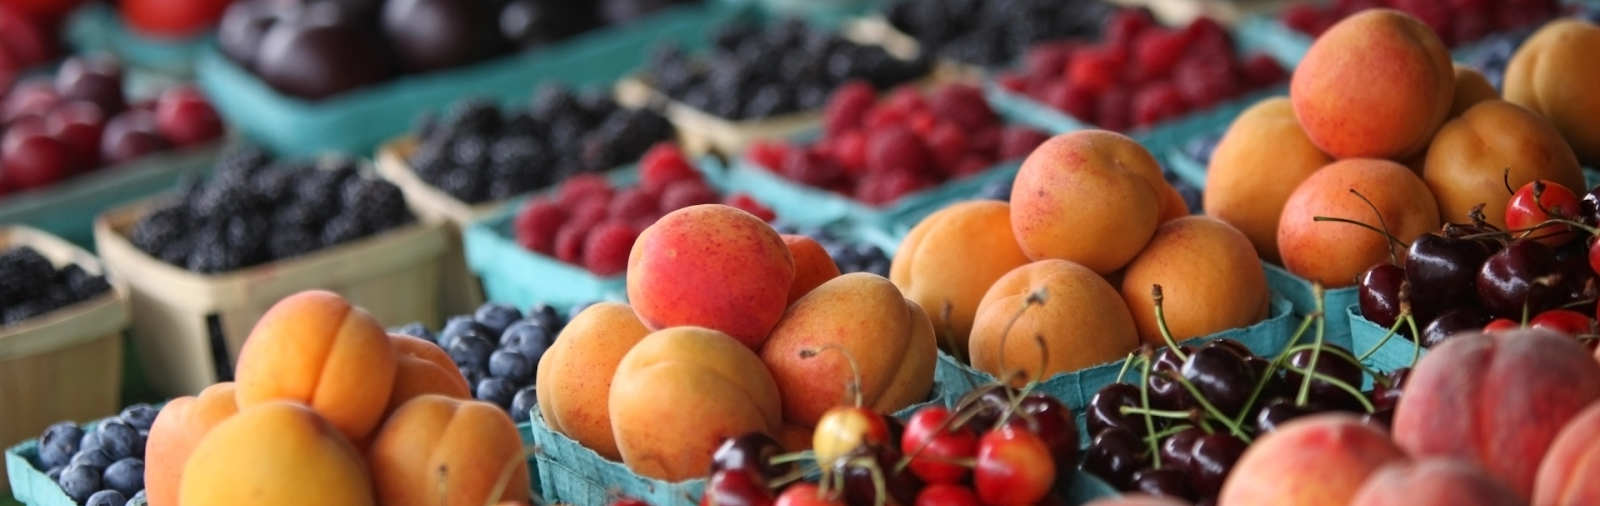 Seasonal fruits and veggies are always available, as are high-quality specialties such as organic ingredients, local syrup, marmalades, caramel truffles, and newly roasted coffee.